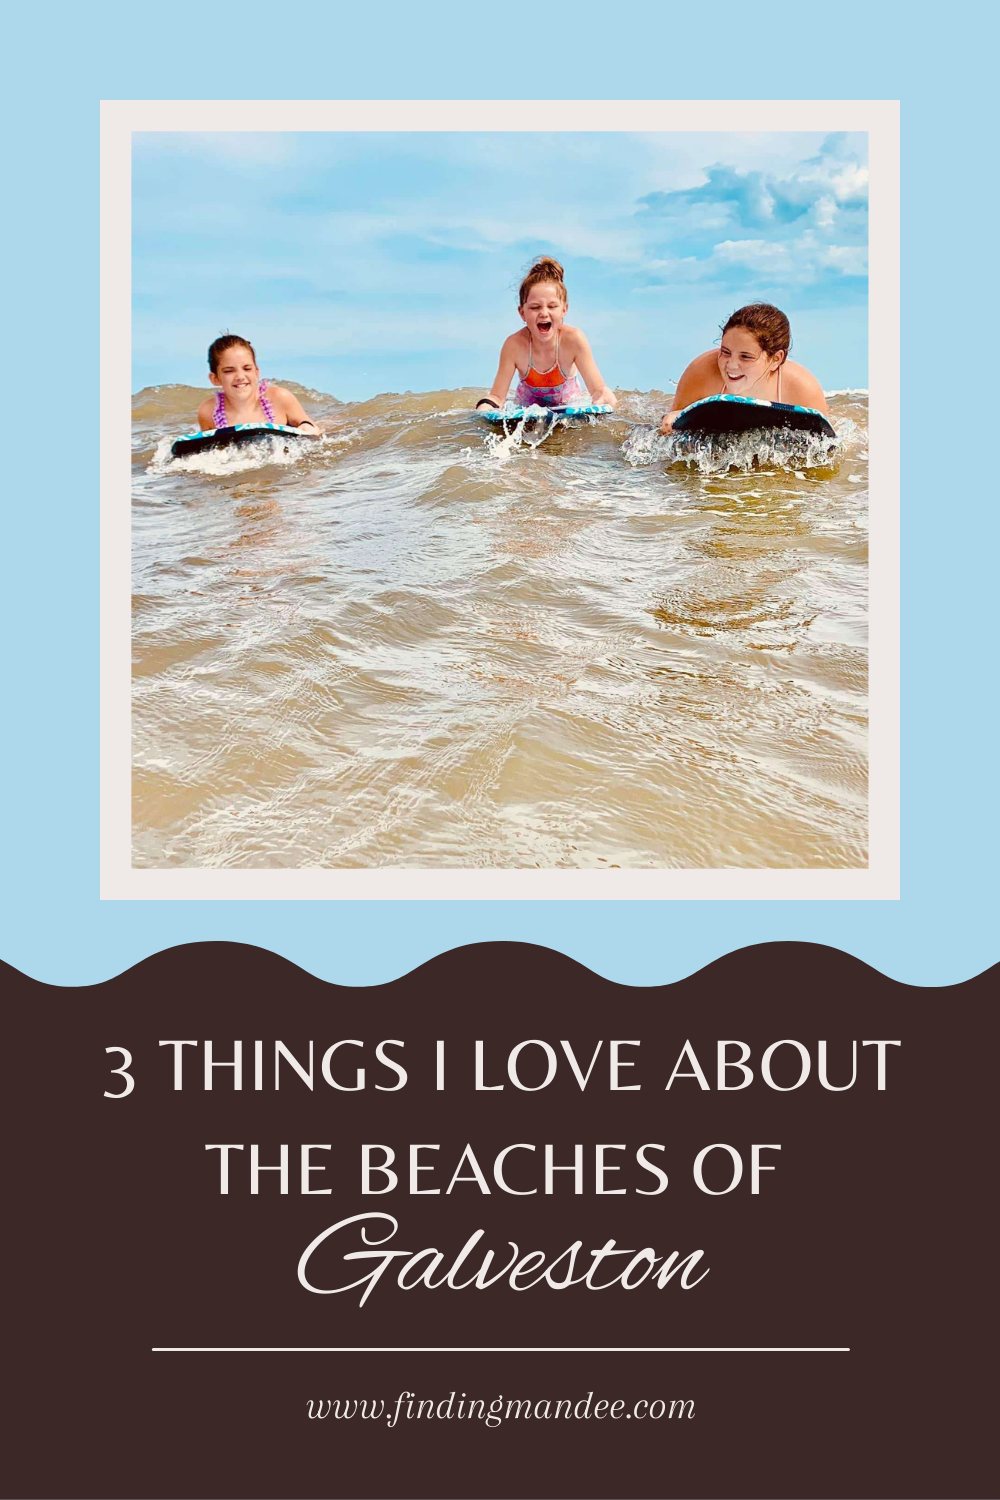 3 Things I Love About the Beaches of Galveston | Finding Mandee